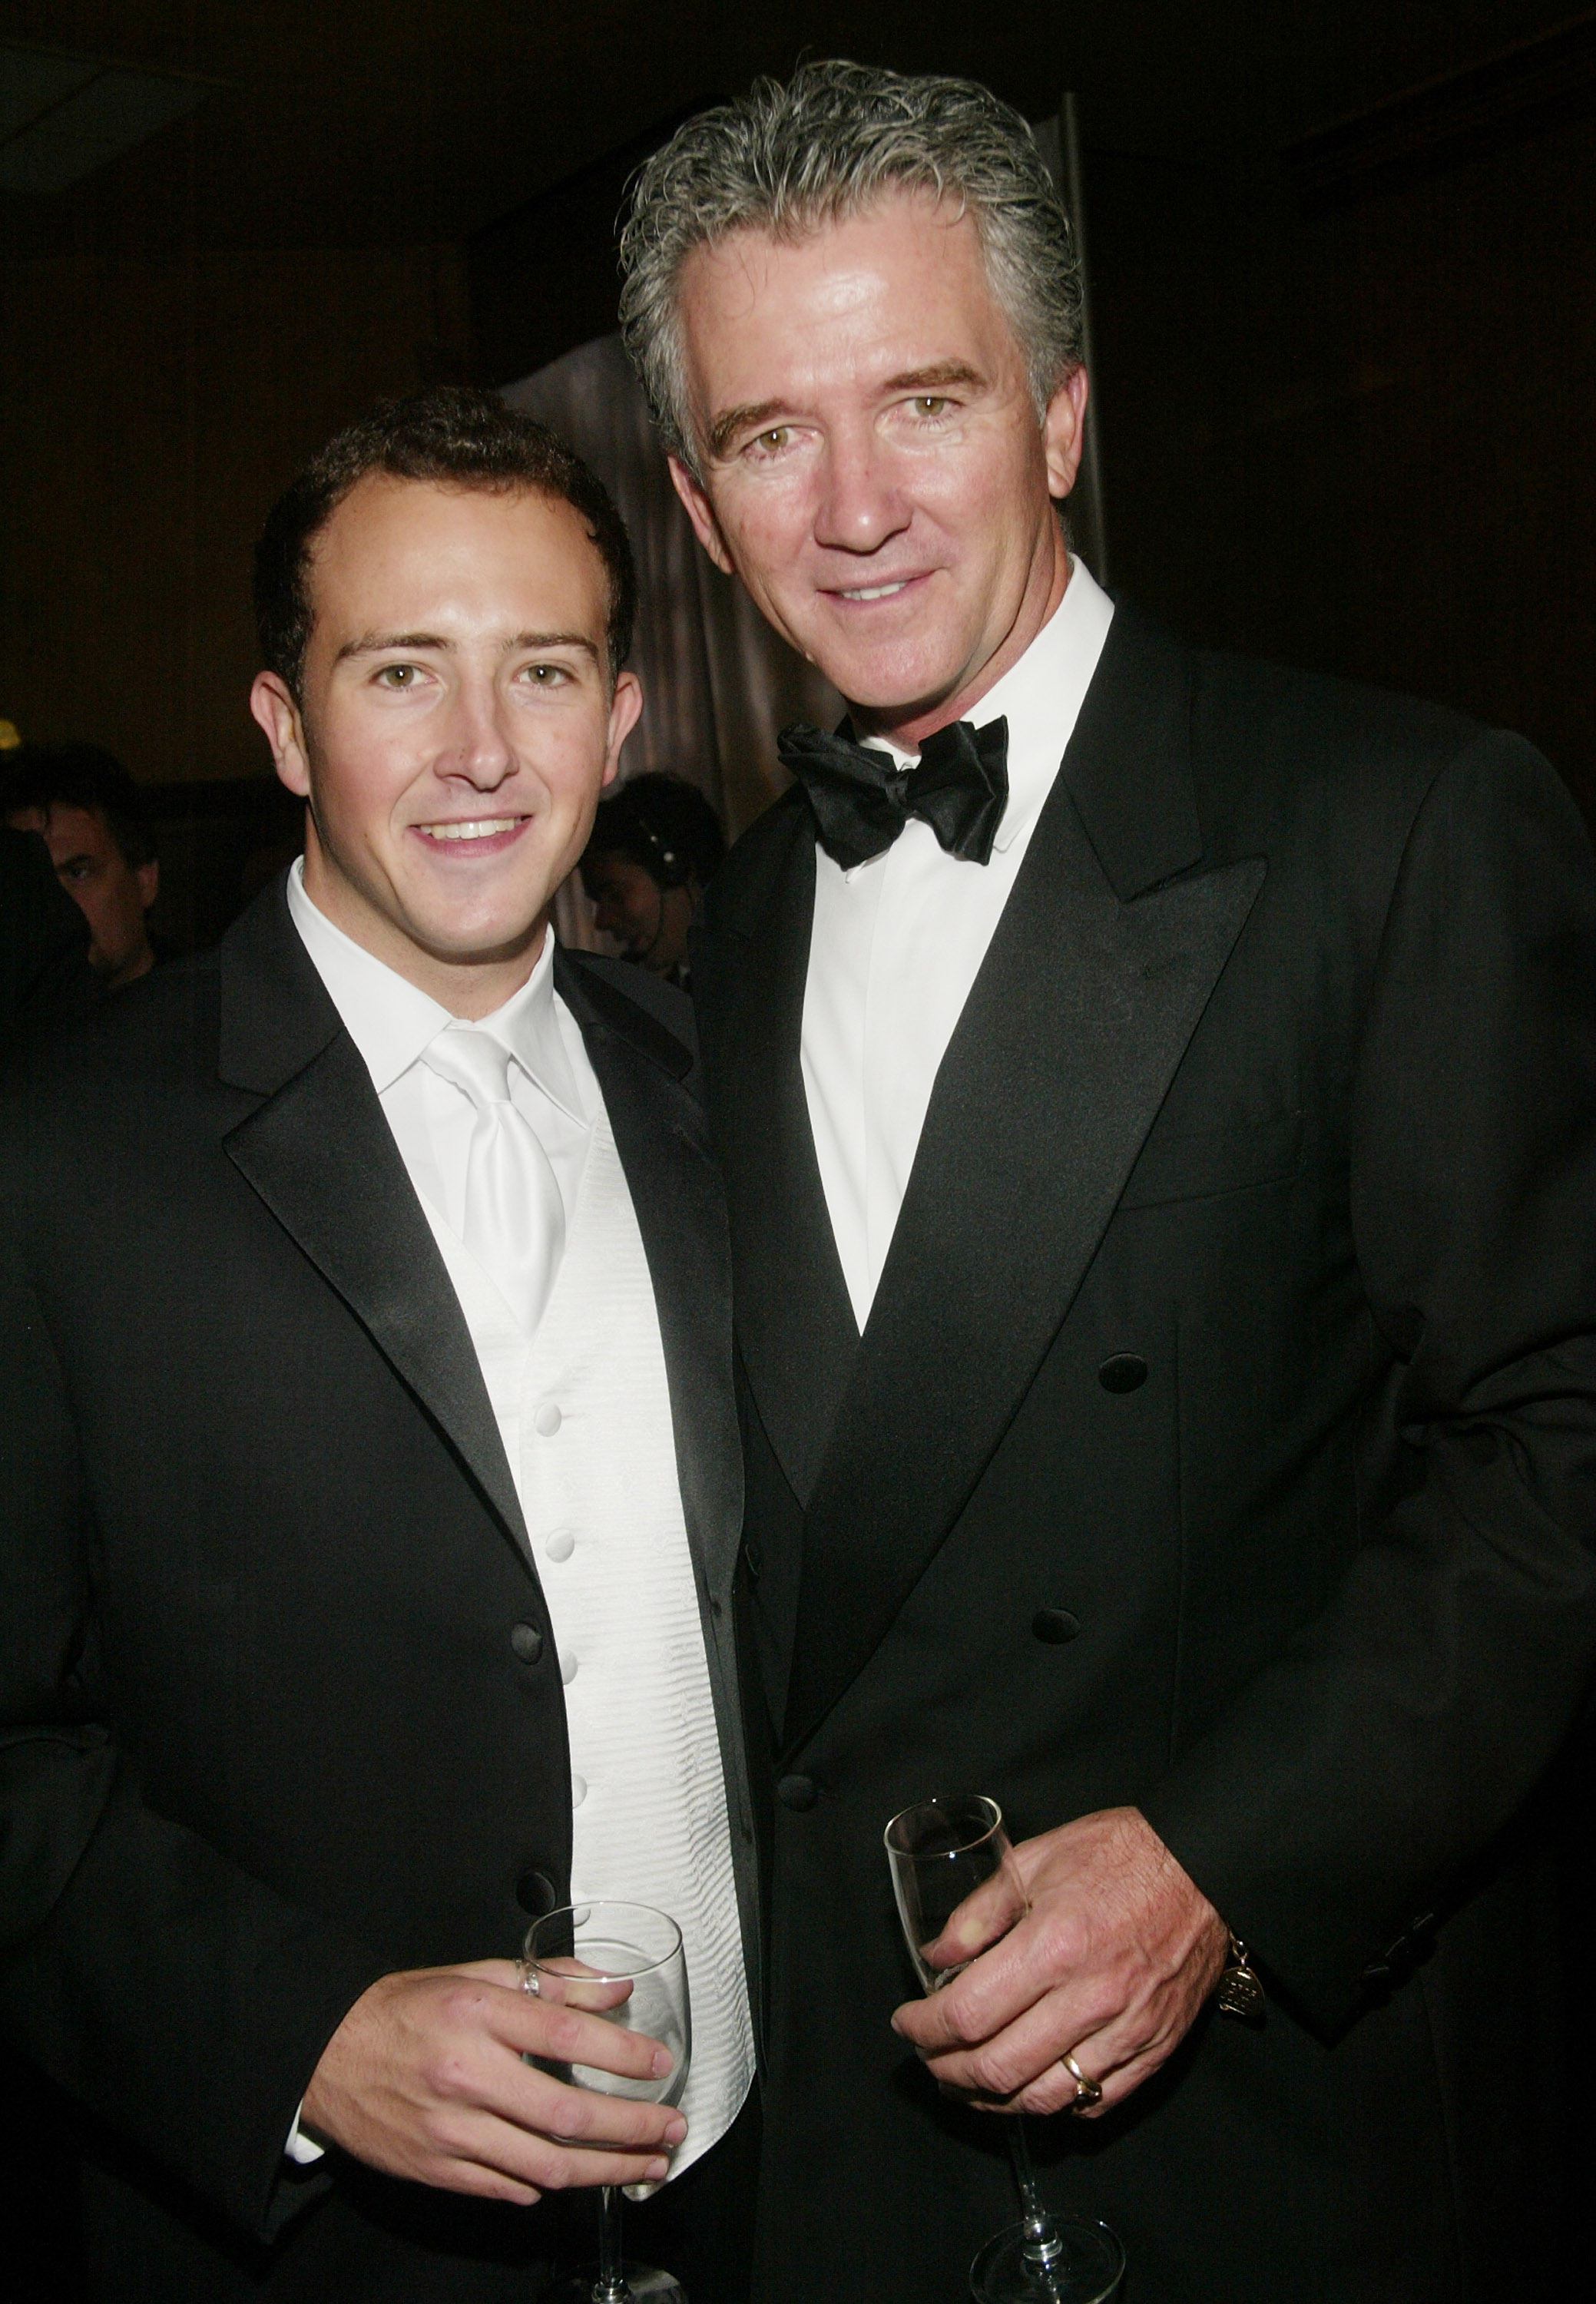 Patrick Duffy and his son Conor in New York in 2003 | Source: Getty Images